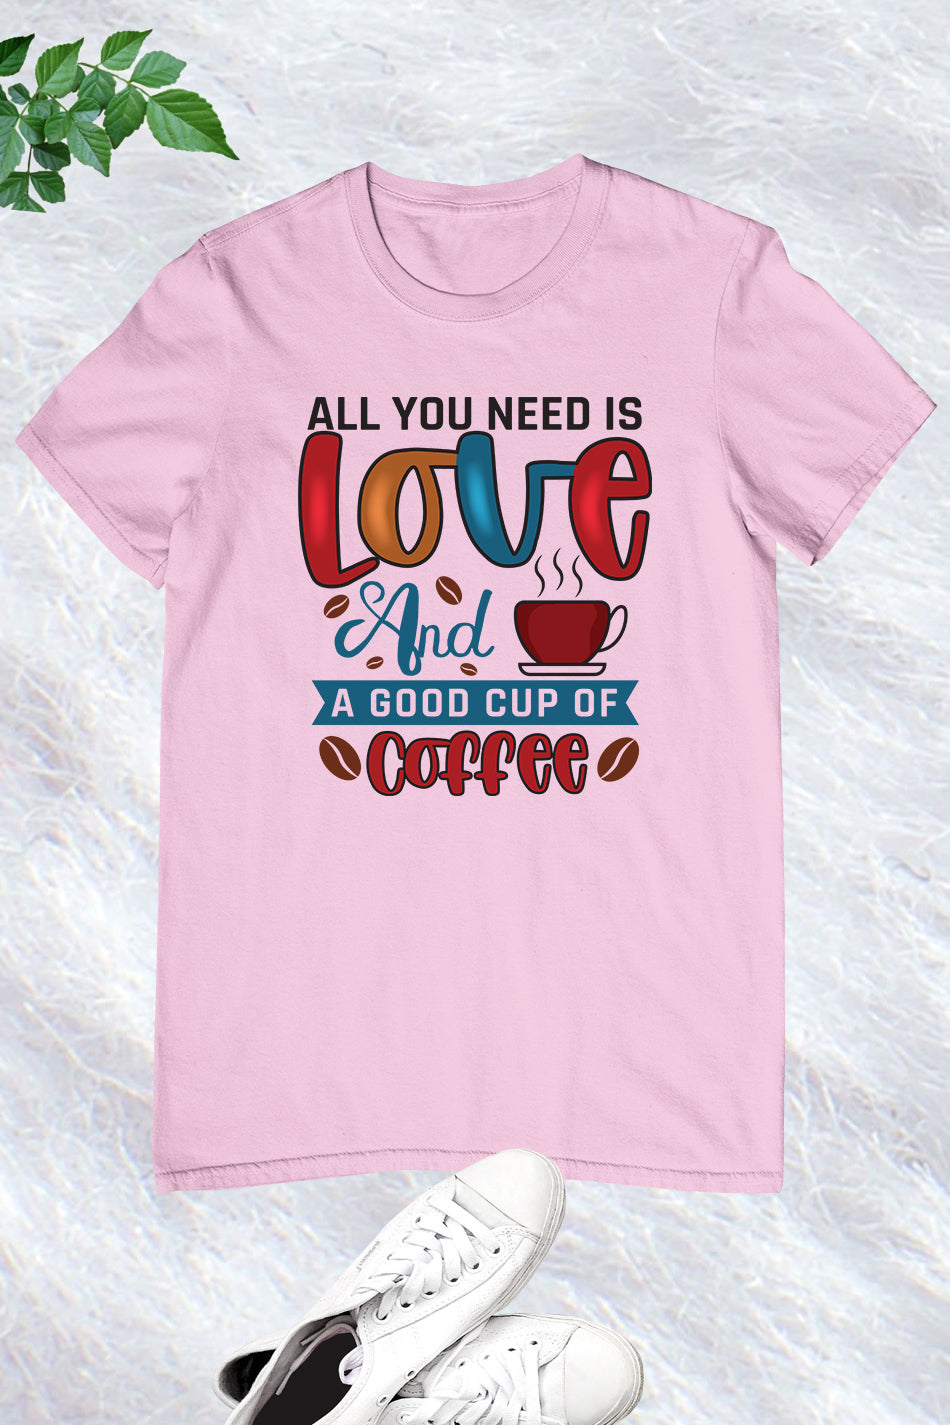 All You Need is Love and a Good Cup Of Coffee Shirts